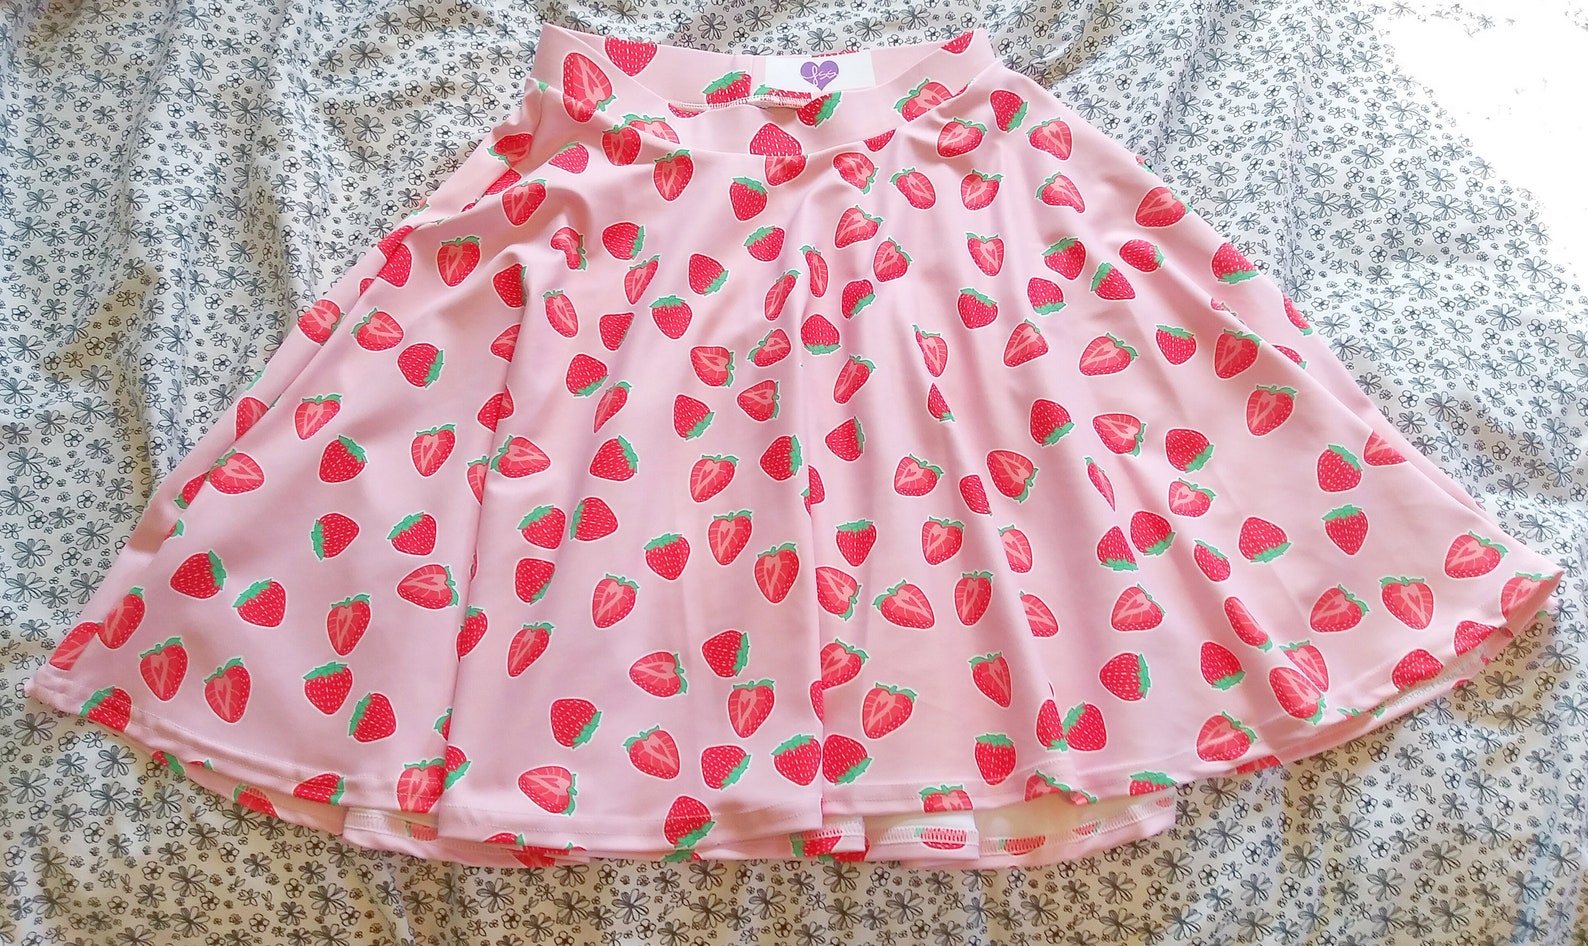 Strawberry Skater Skirt Pink Kawaii Clothing with Scattered | Etsy